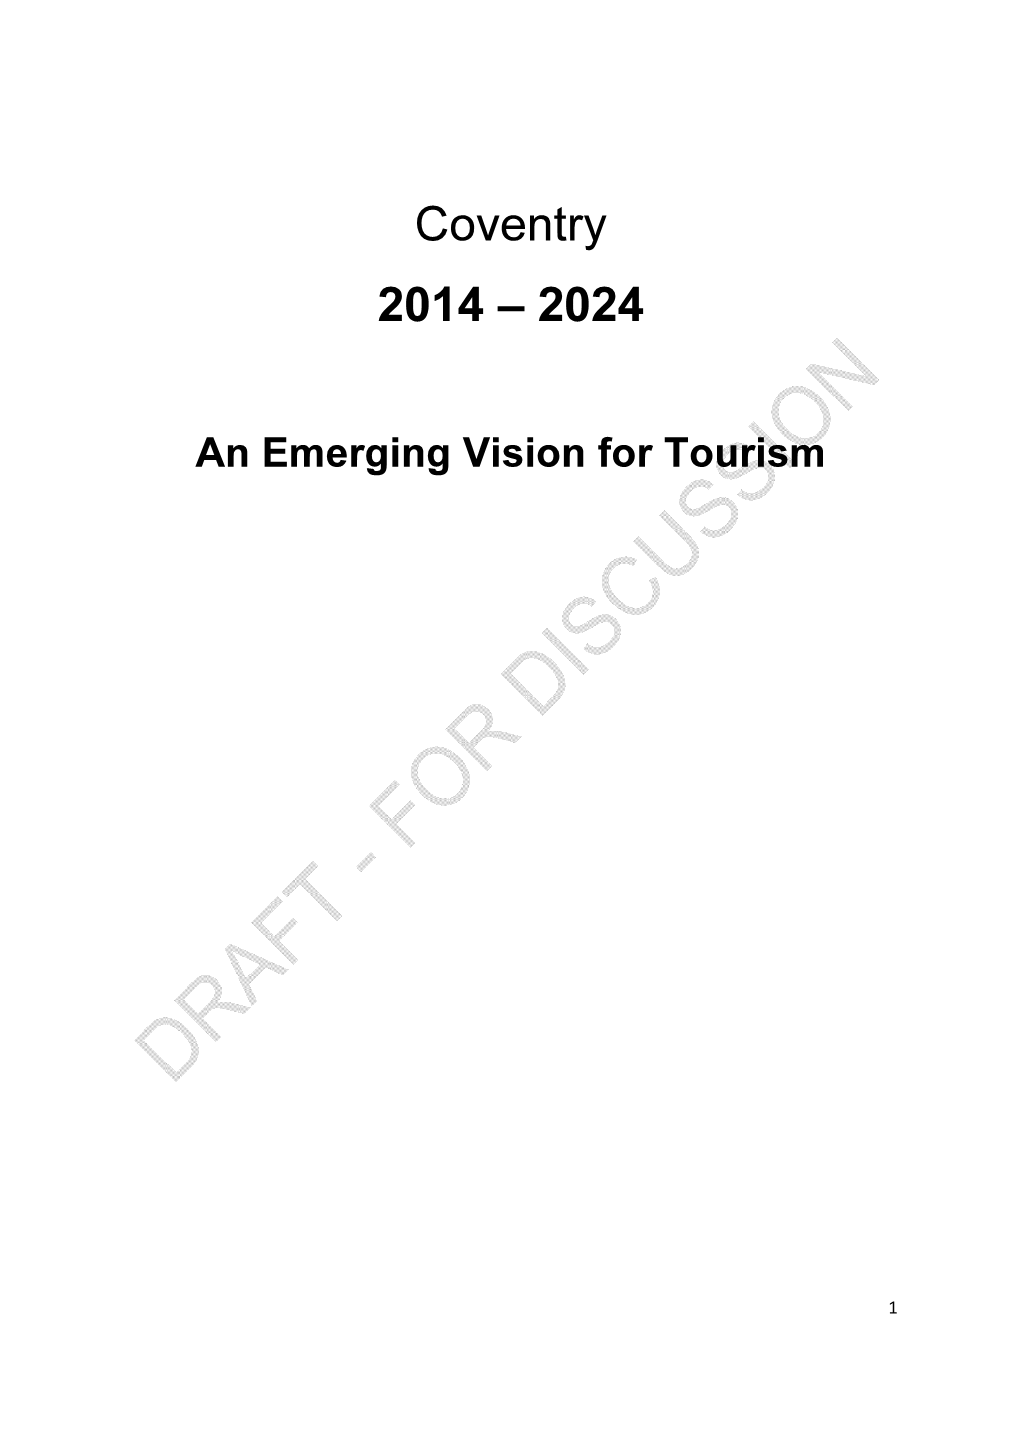 Download AAP21 Emerging Tourism Strategy 2014